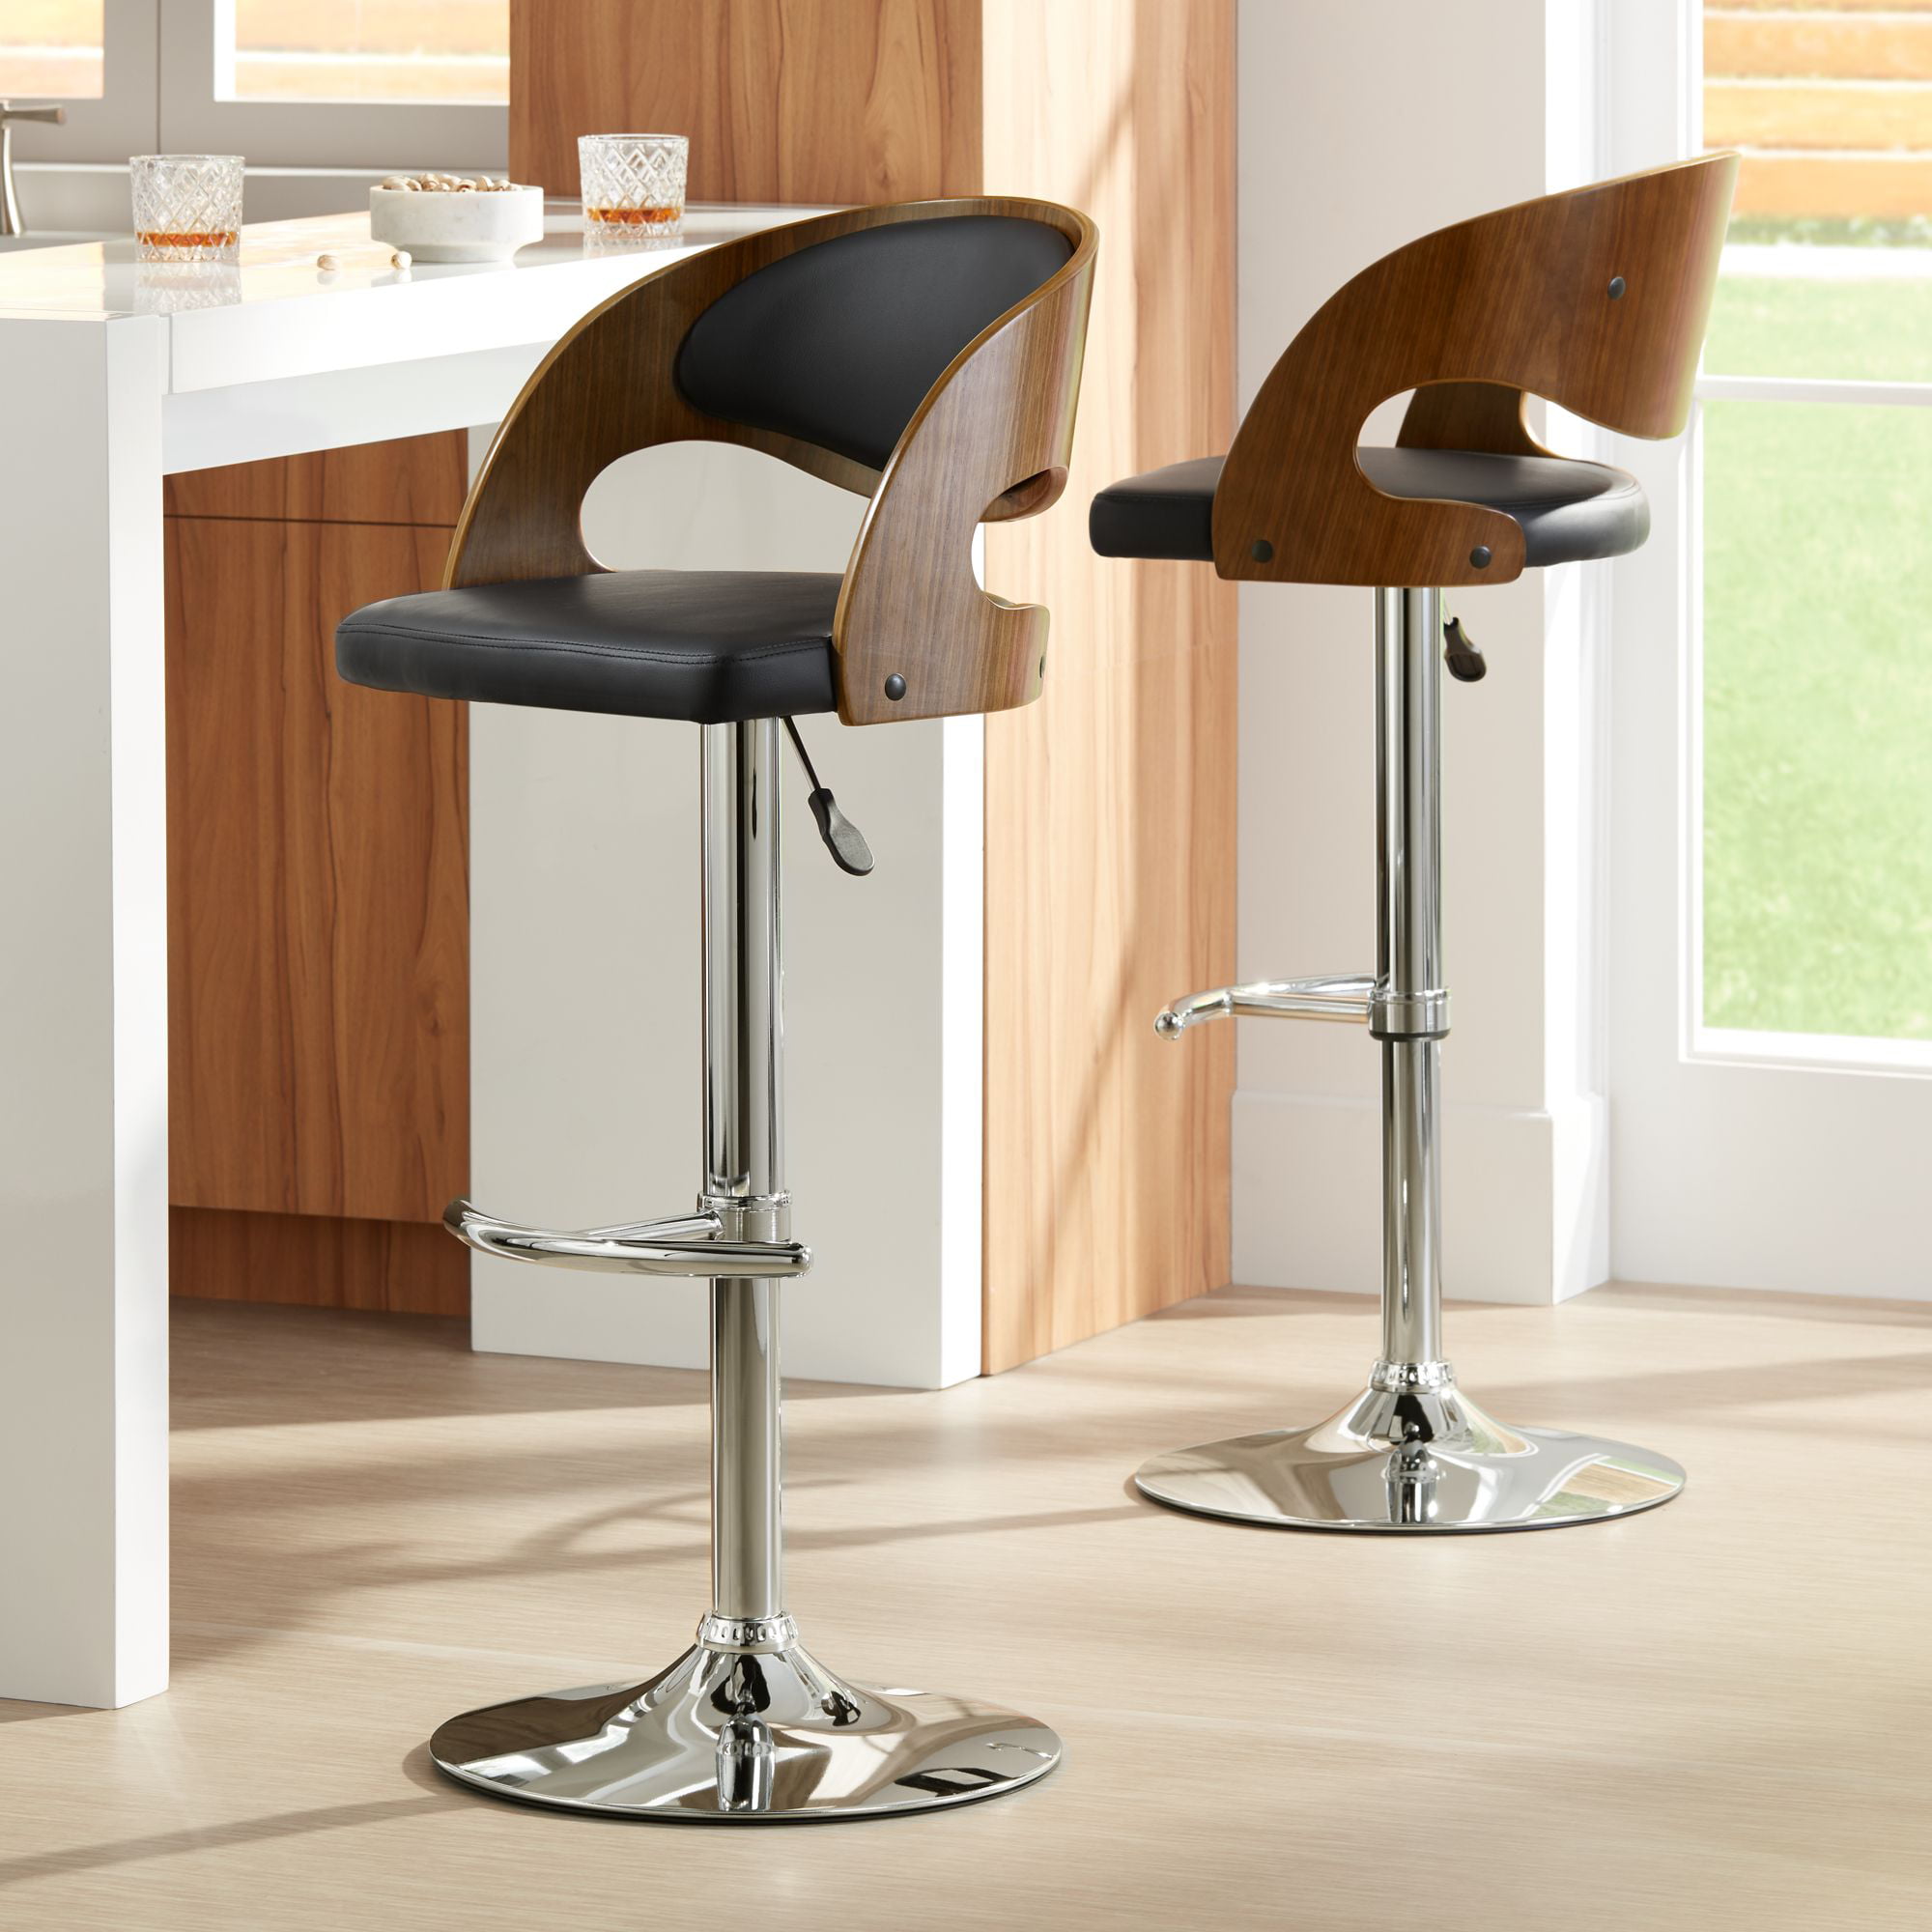 Faux Leather Swivel Bar Stools Set, Leather Swivel Bar Stools With Backs And Arms